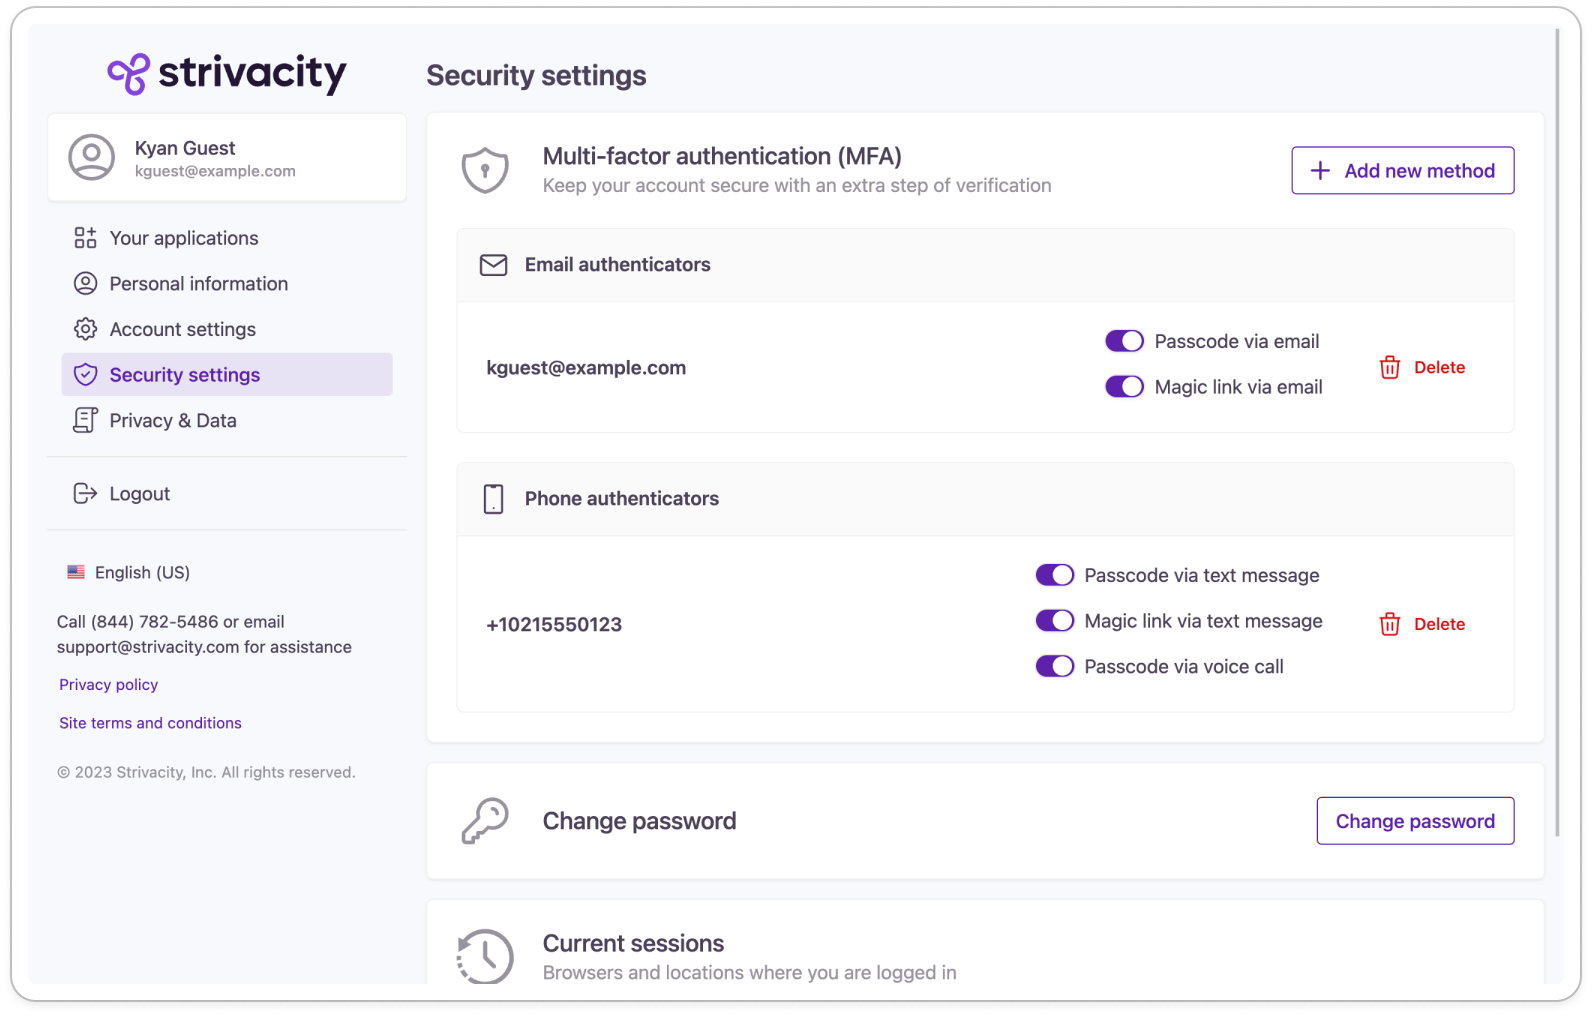 Security settings page